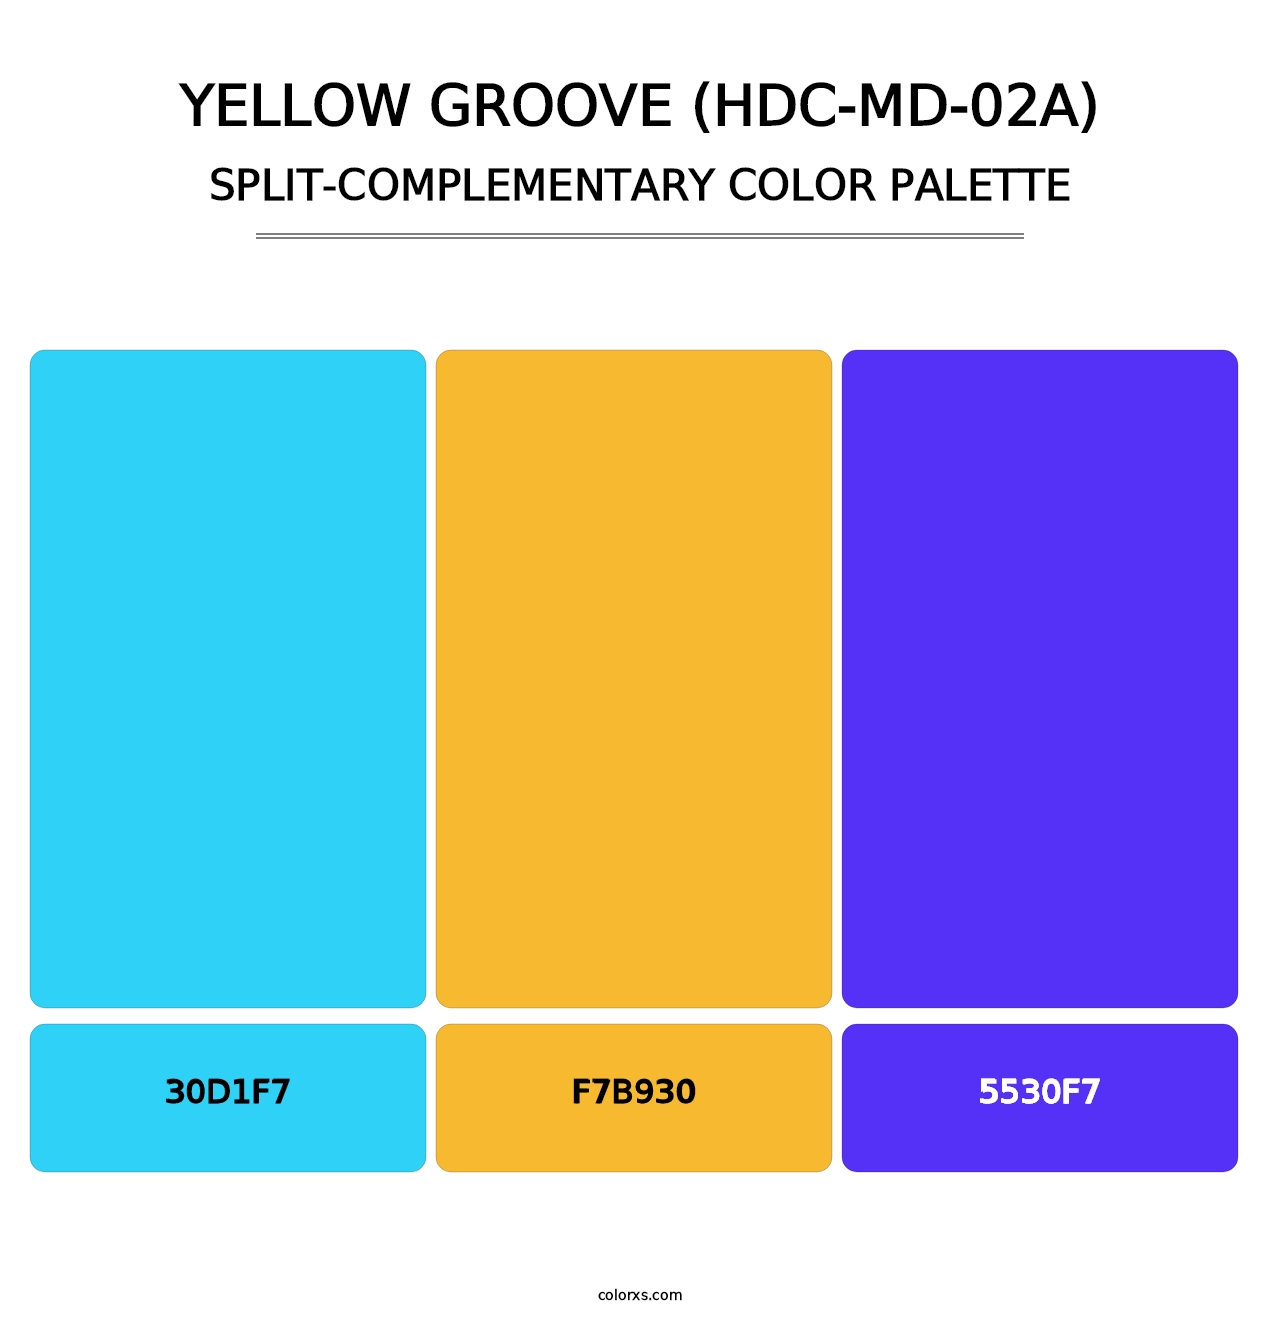 Yellow Groove (HDC-MD-02A) - Split-Complementary Color Palette